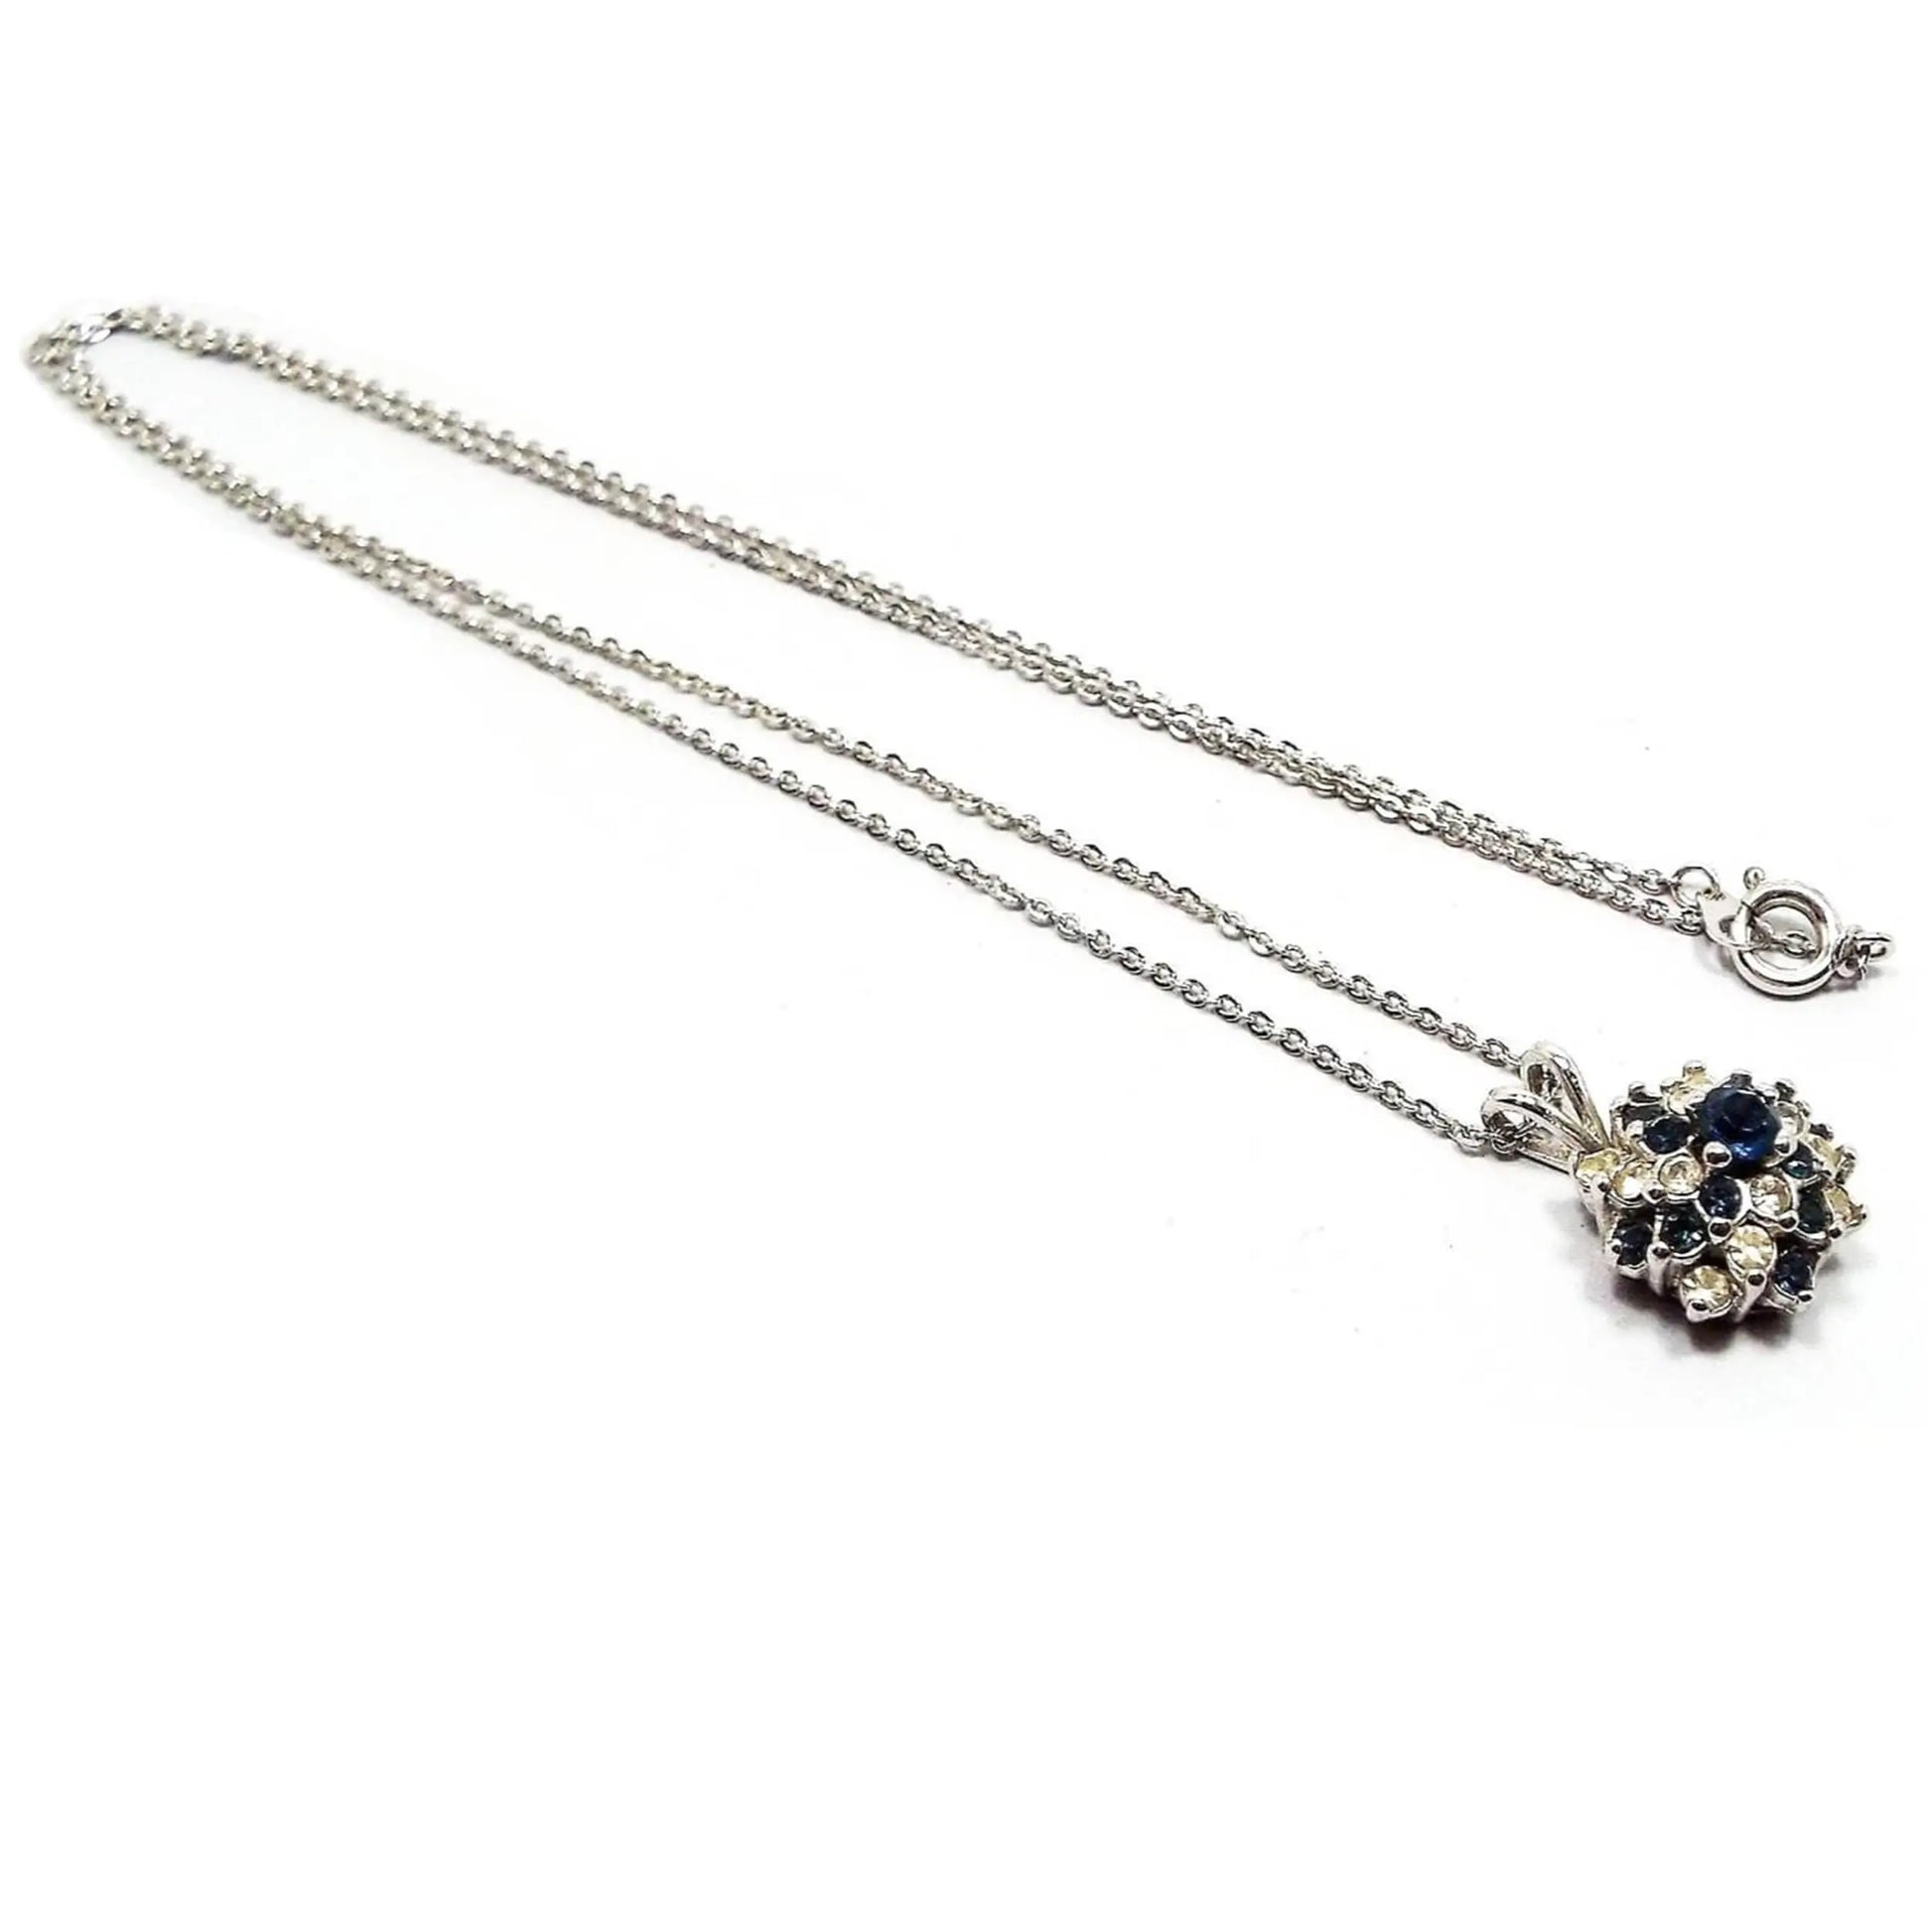 Front view of the small retro vintage rhinestone pendant necklace. The metal is silver tone in color and it has a thinner sized cable chain with a spring ring clasp at the end. The bottom pendant is round flower like stacked shape with dark blue and clear rhinestones.